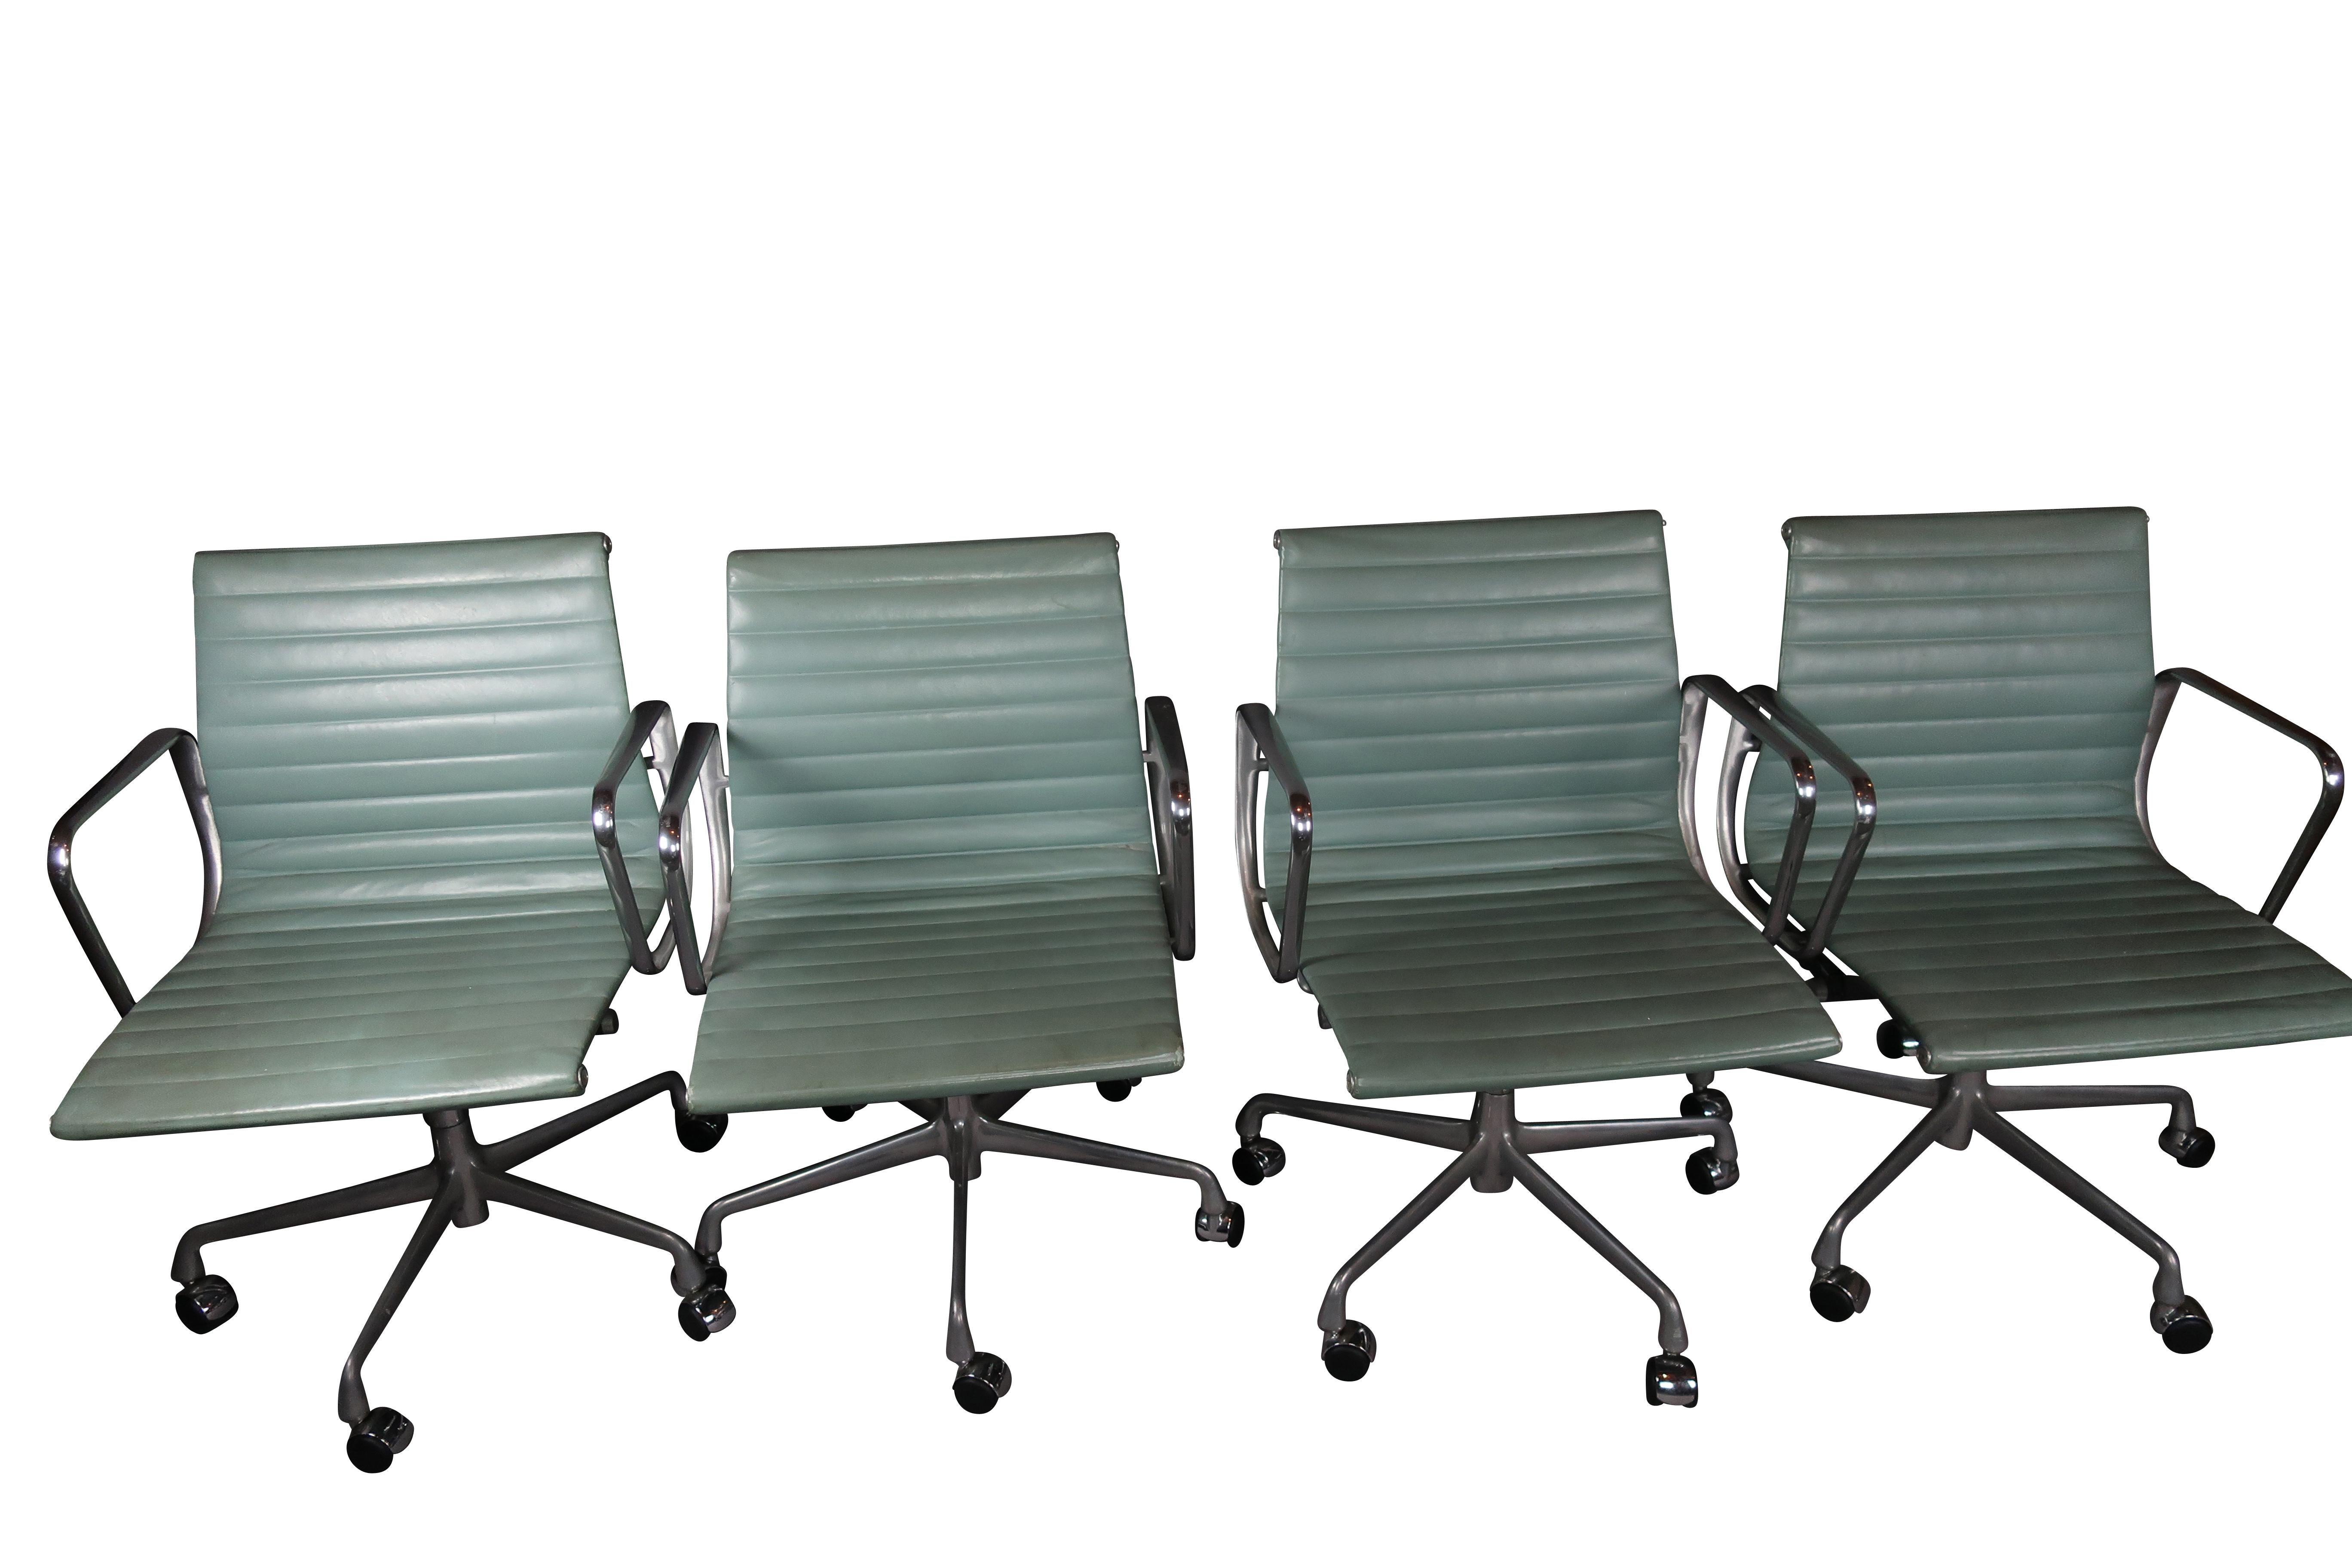 Vintage Eames Group Management Chairs Eames with Pneumatic lift four Seafoam egg blue leather, originally purchased through design within reach.